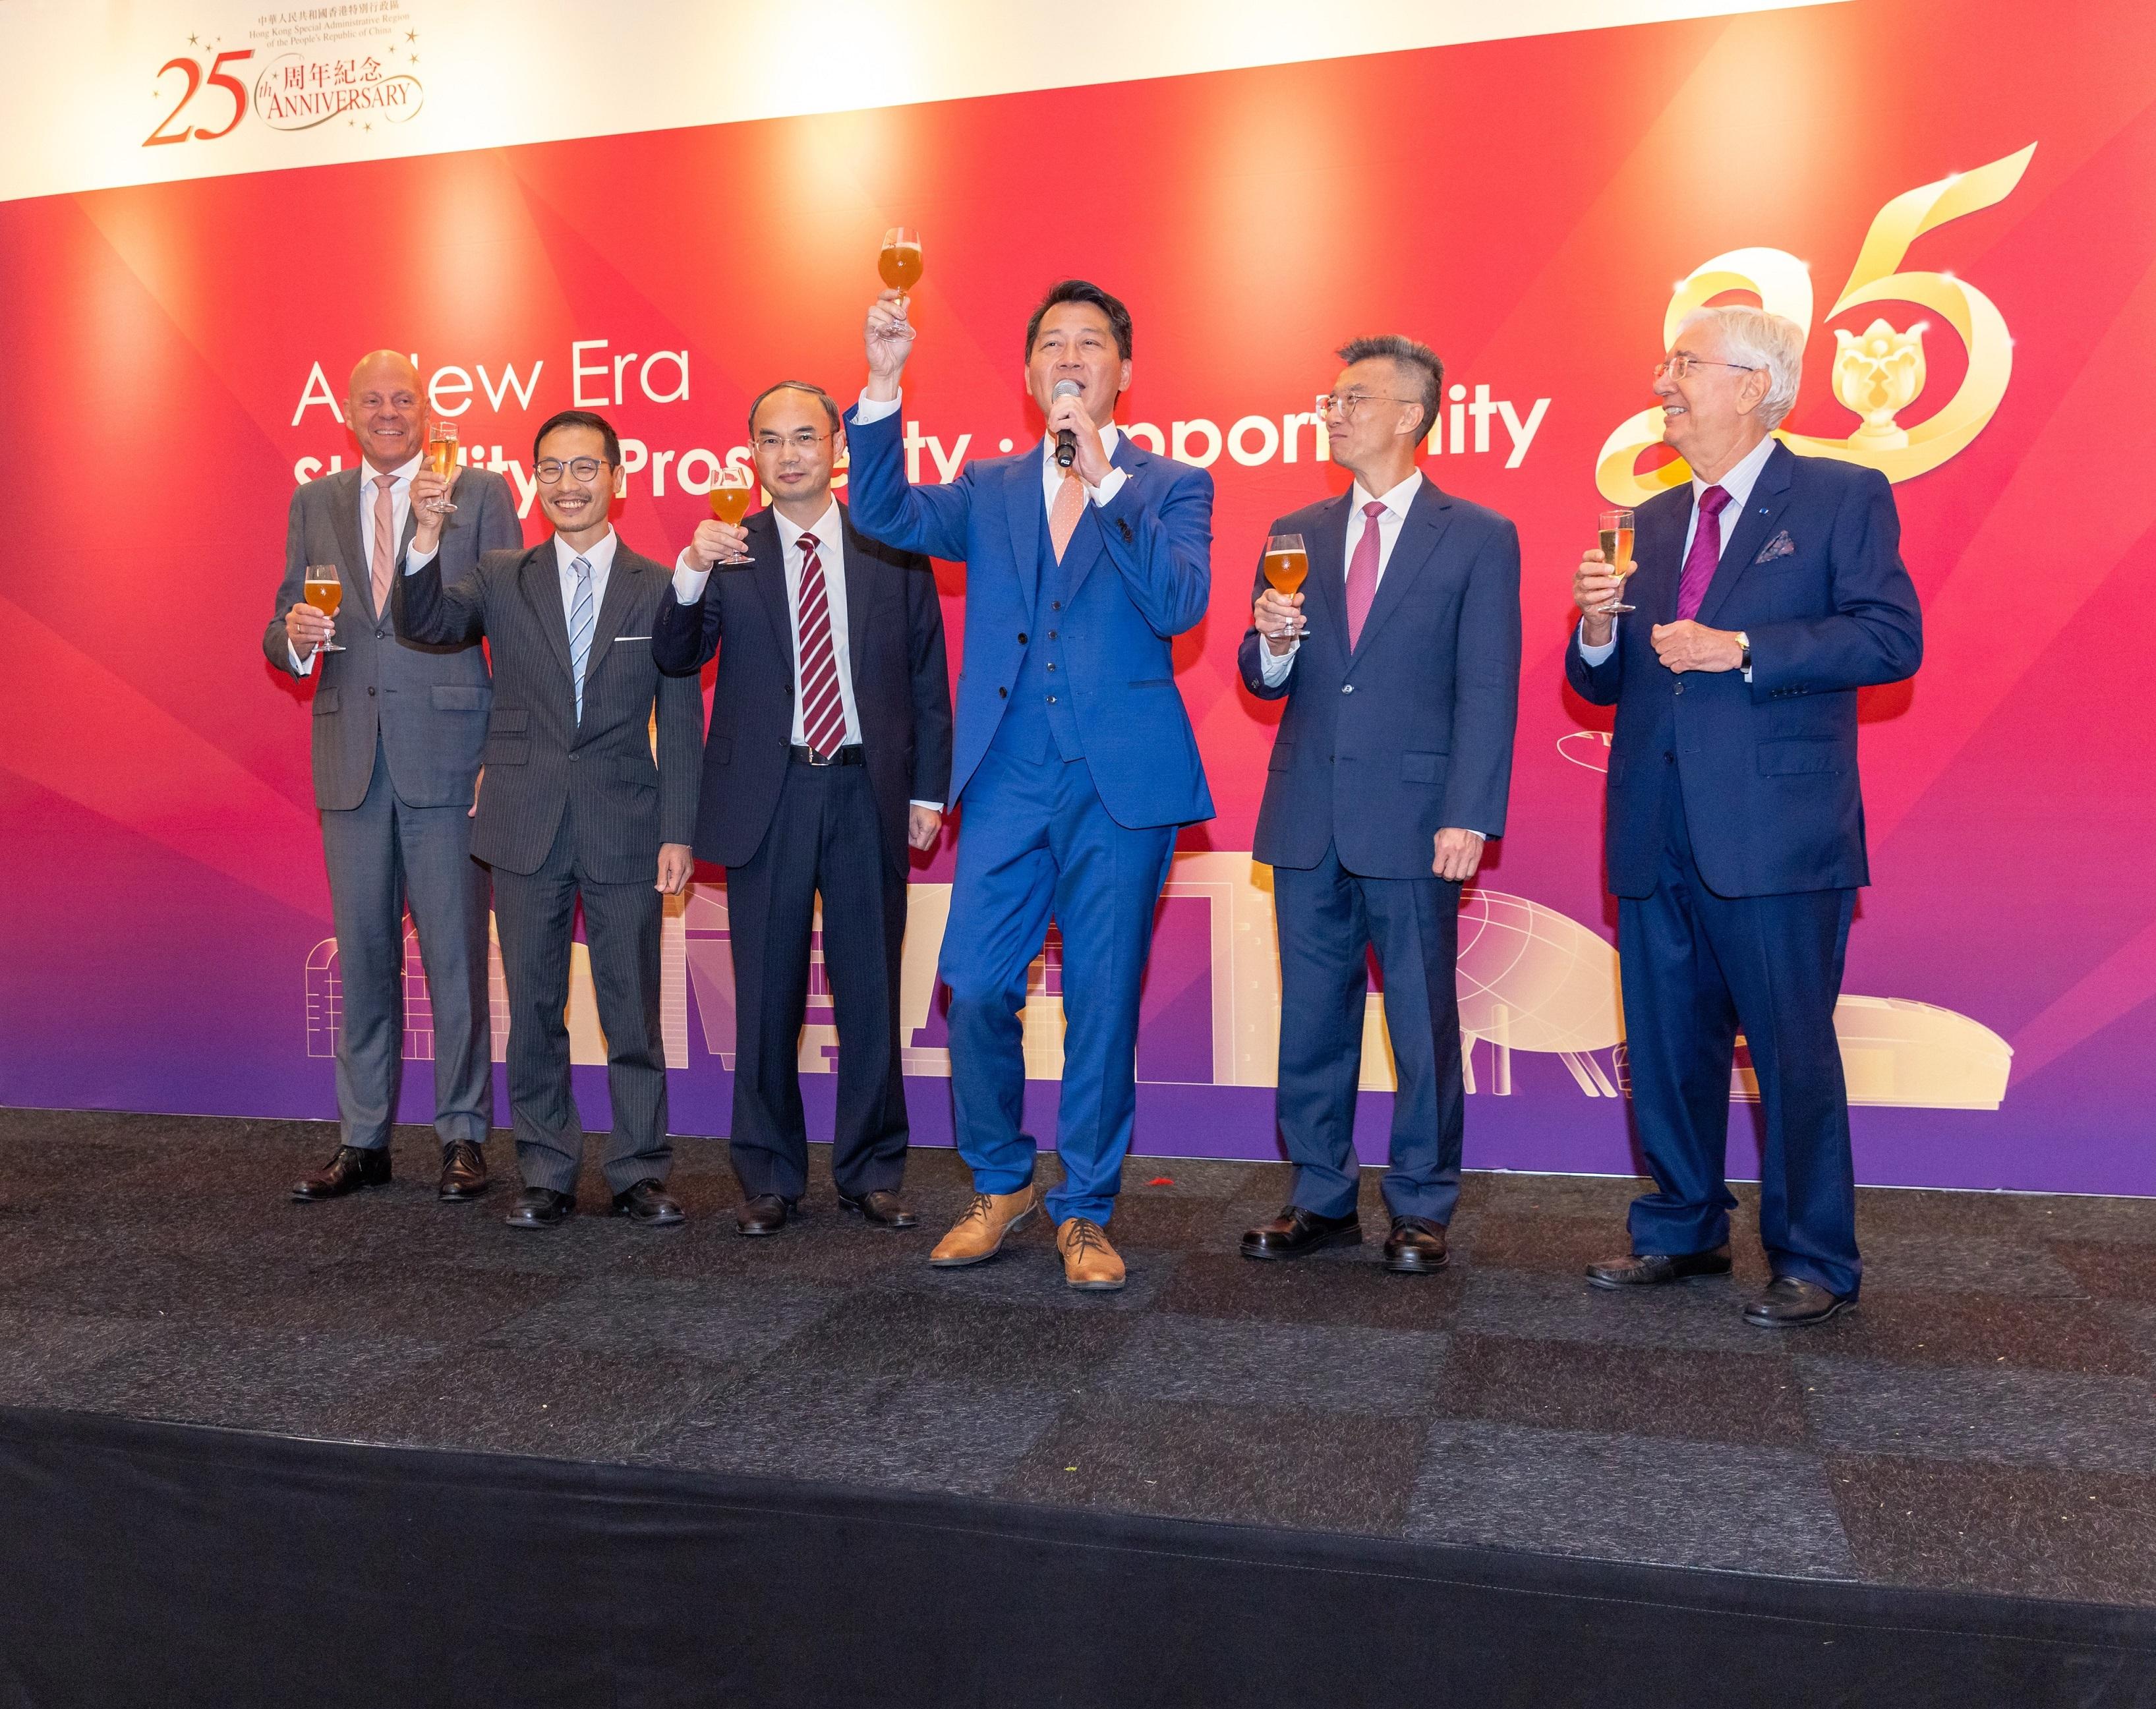 The Special Representative for Hong Kong Economic and Trade Affairs to the European Union, Mr Eddie Cheung (third right); the Chinese Ambassador to Belgium, Mr Cao Zhongming (third left); the Minister in Charge  of Economy and Trade, Chinese Mission to the European Union Mr Peng Gang (second right); and other VIP guests raise a toast at a gala event to celebrate the 25th anniversary of the establishment of the Hong Kong Special Administrative Region held in Brussels, Belgium, on June 30 (Brussels time).